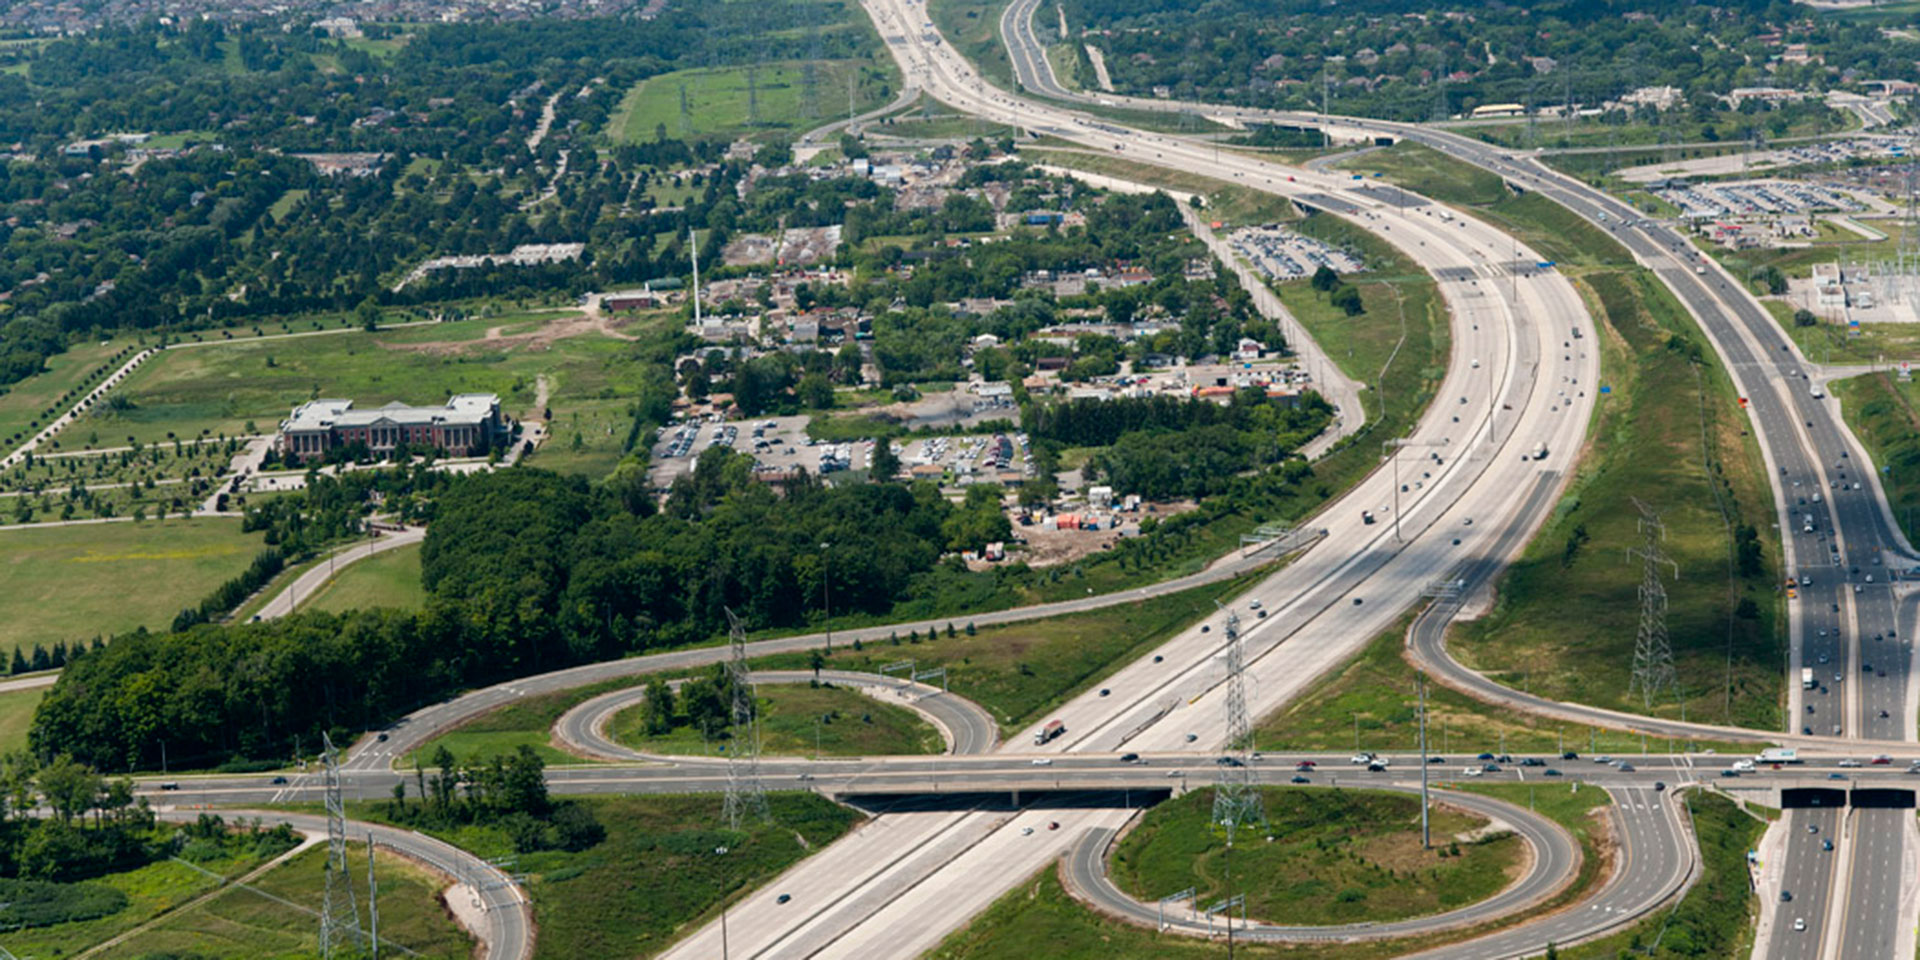 Highway 407 Express Toll Route